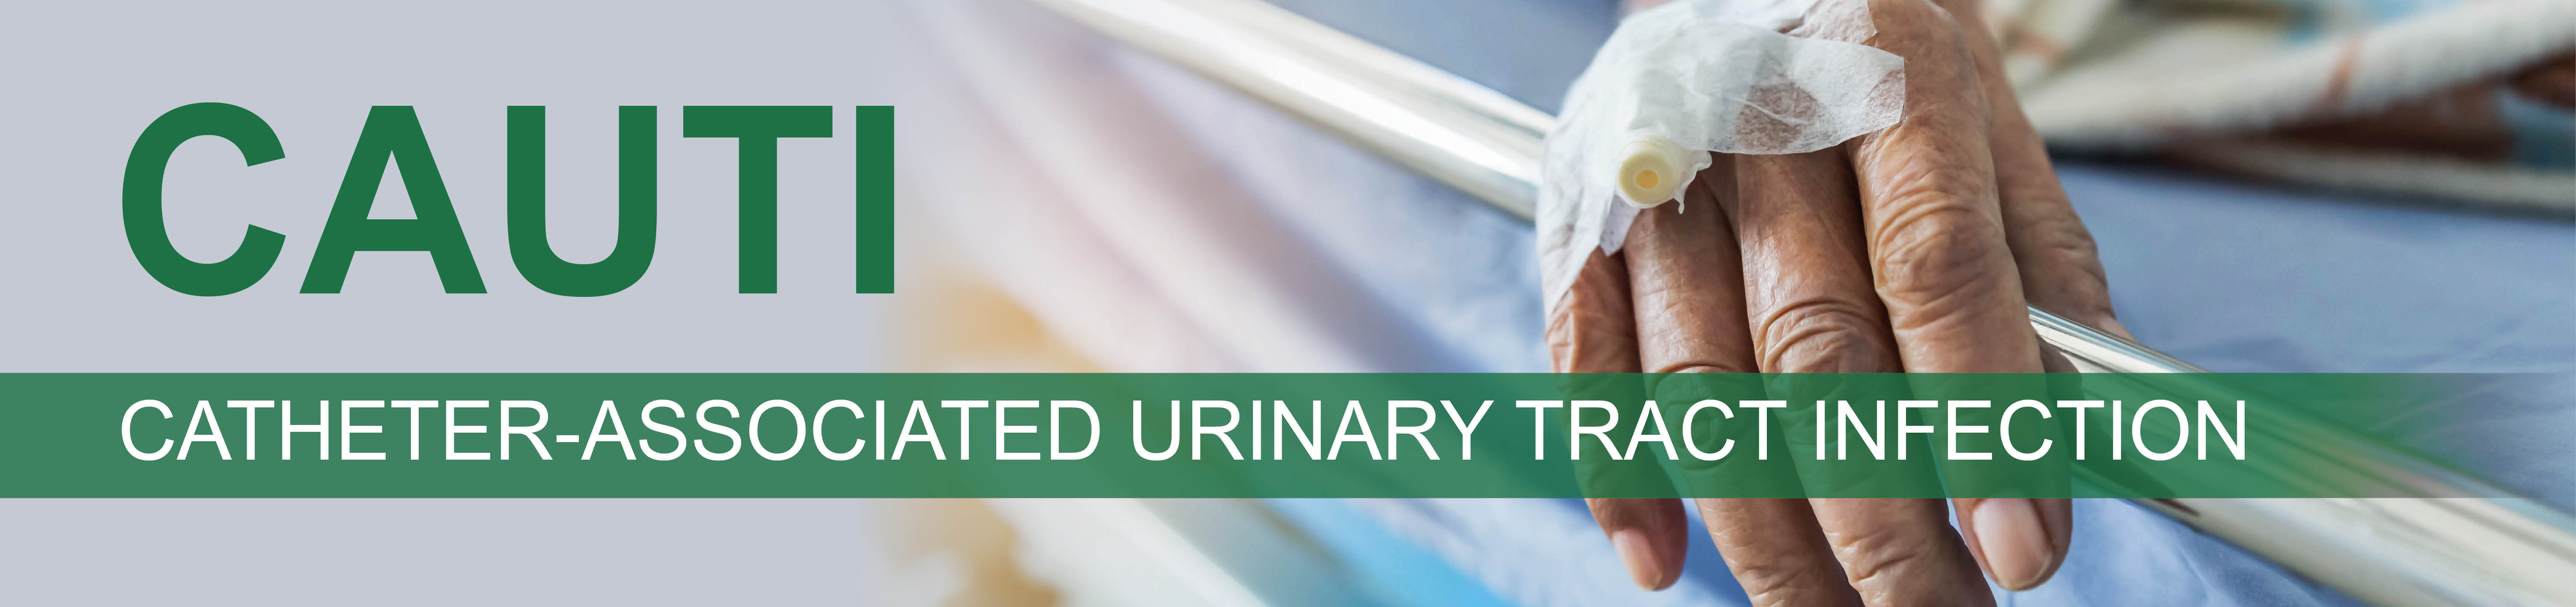 CAUTI: Catheter-Associated Urinary Tract Infection